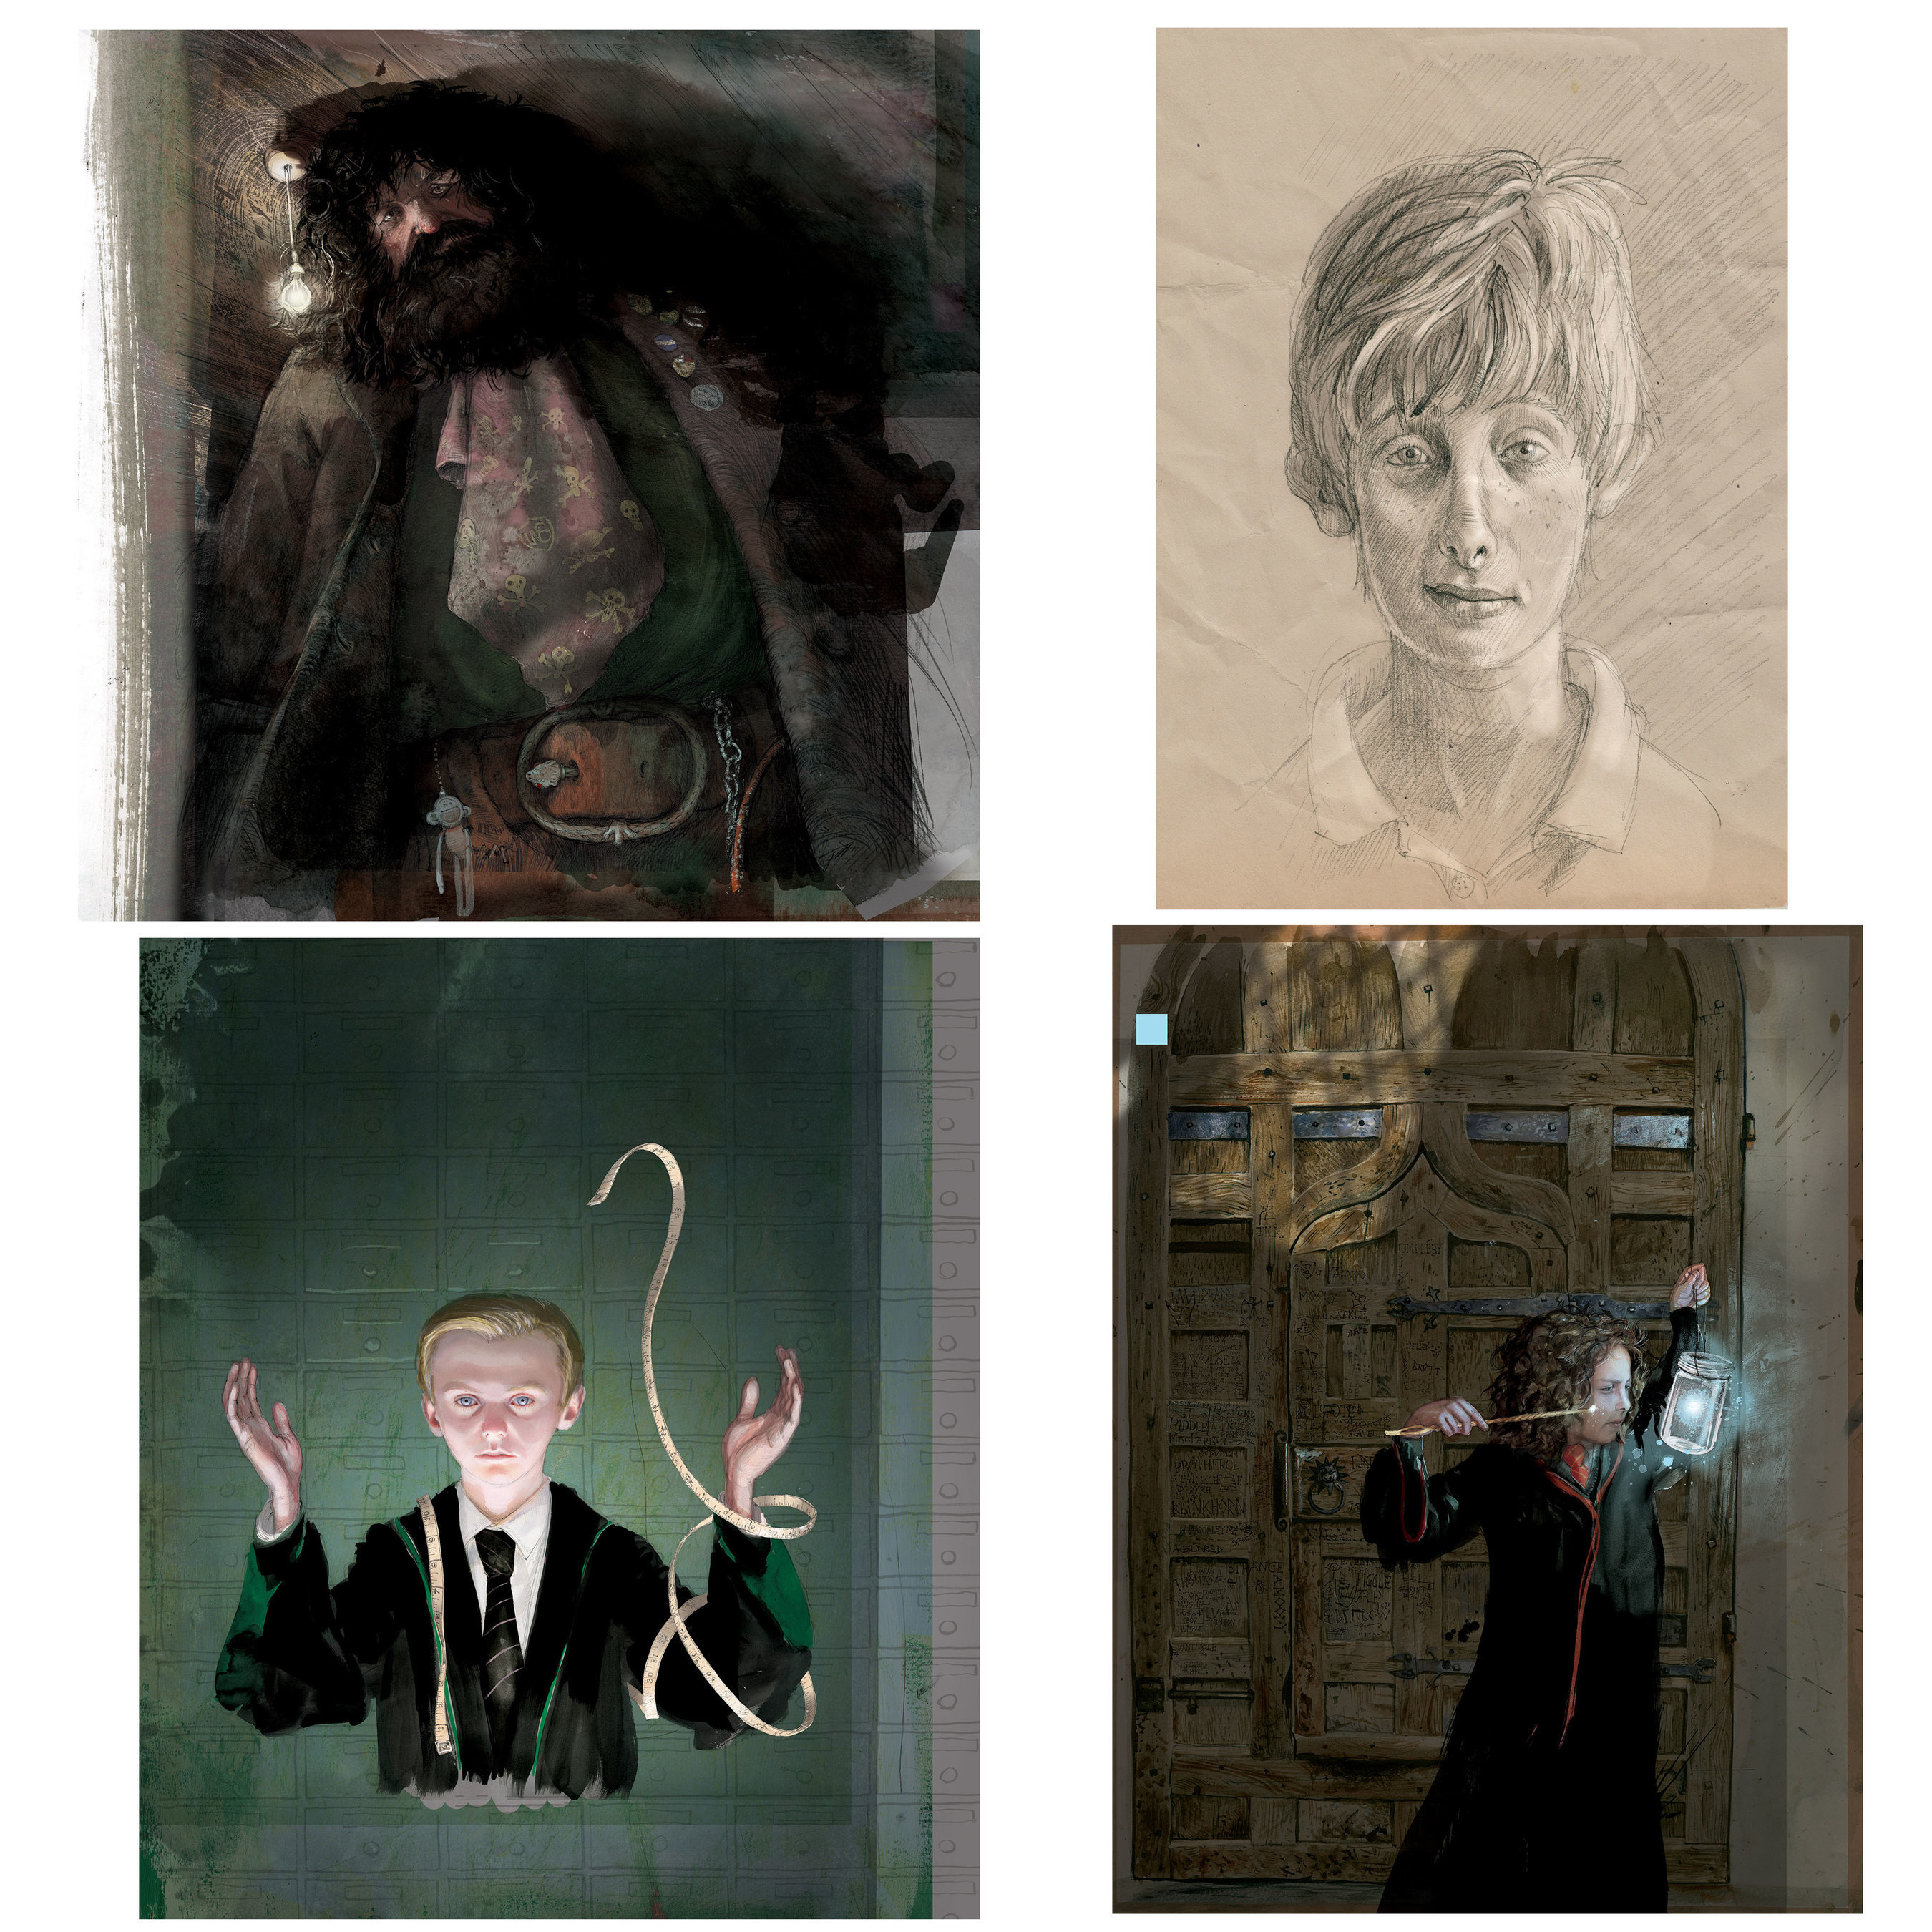 Hagrid, Ron, Draco and Hermione - four exclusive images from the upcoming fully illustrated edition of Harry Potter and the Sorcerer's Stone.  (credit: Illustrations by Jim Kay (C) 2014 by Bloomsbury Publishing Plc.)